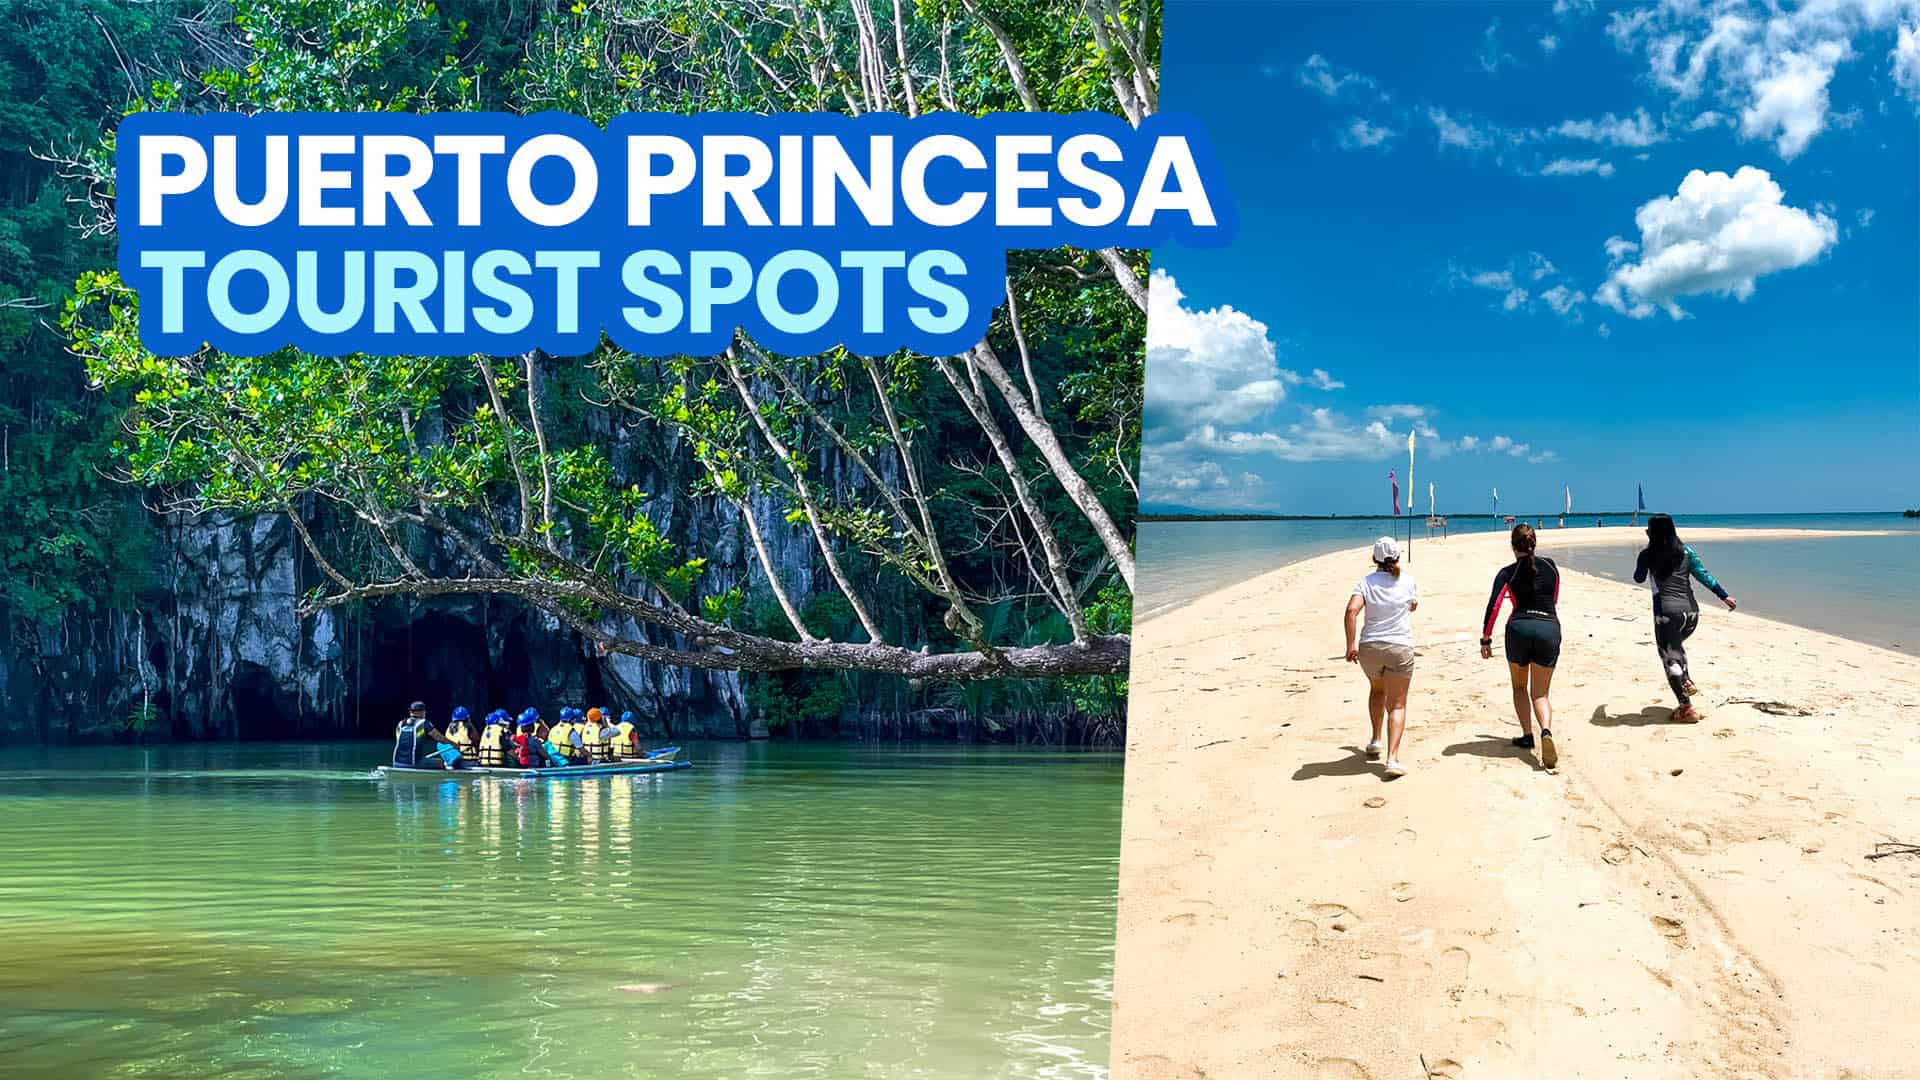 Top 25 PUERTO PRINCESA Tourist Spots to Visit & Things to Do 2022